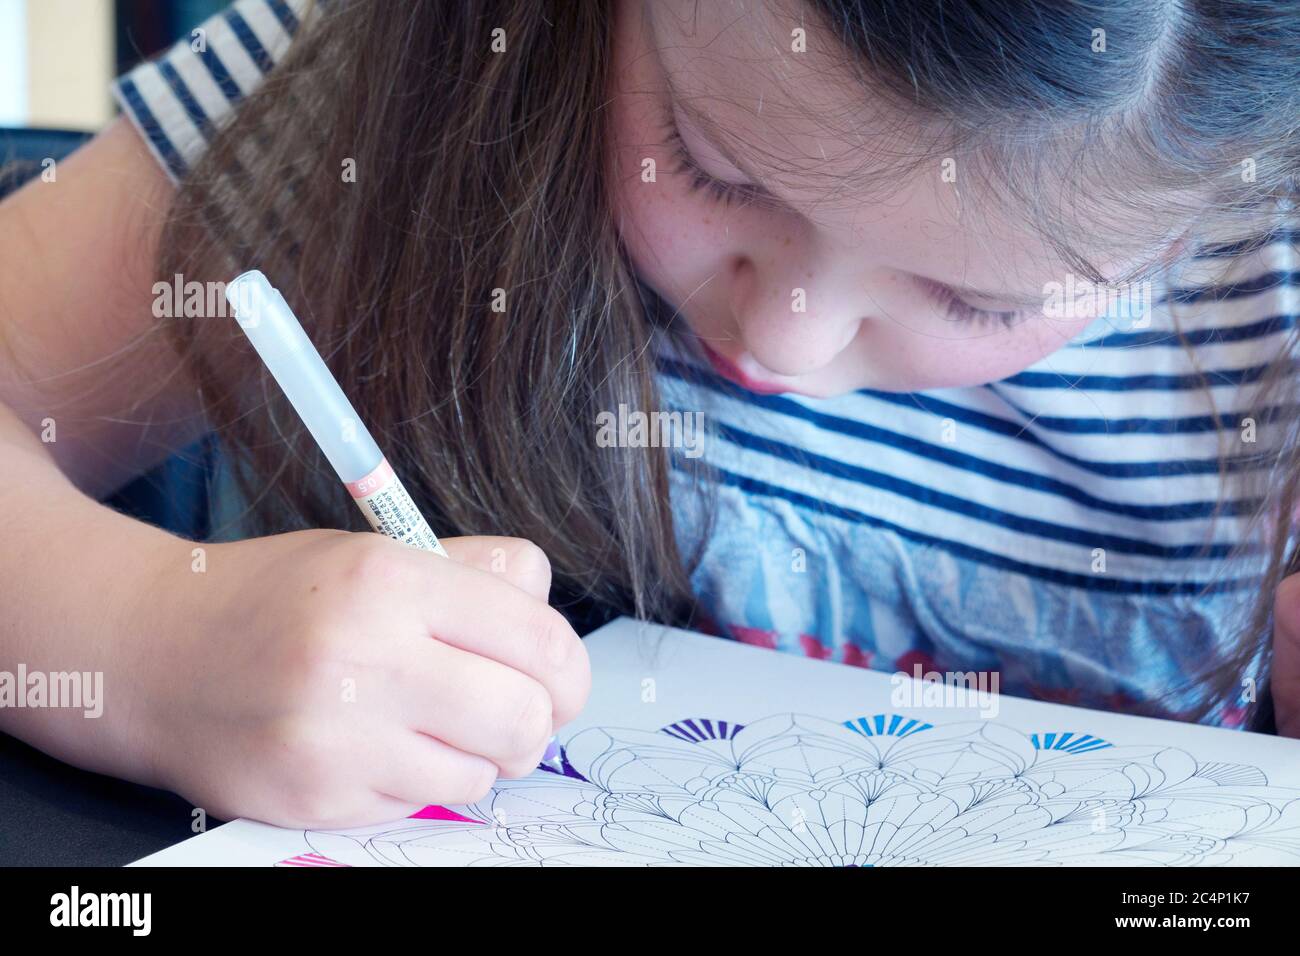 A child sat at home and concentrating hard colouring in an adult colouring book with assorted coloured pens Stock Photo